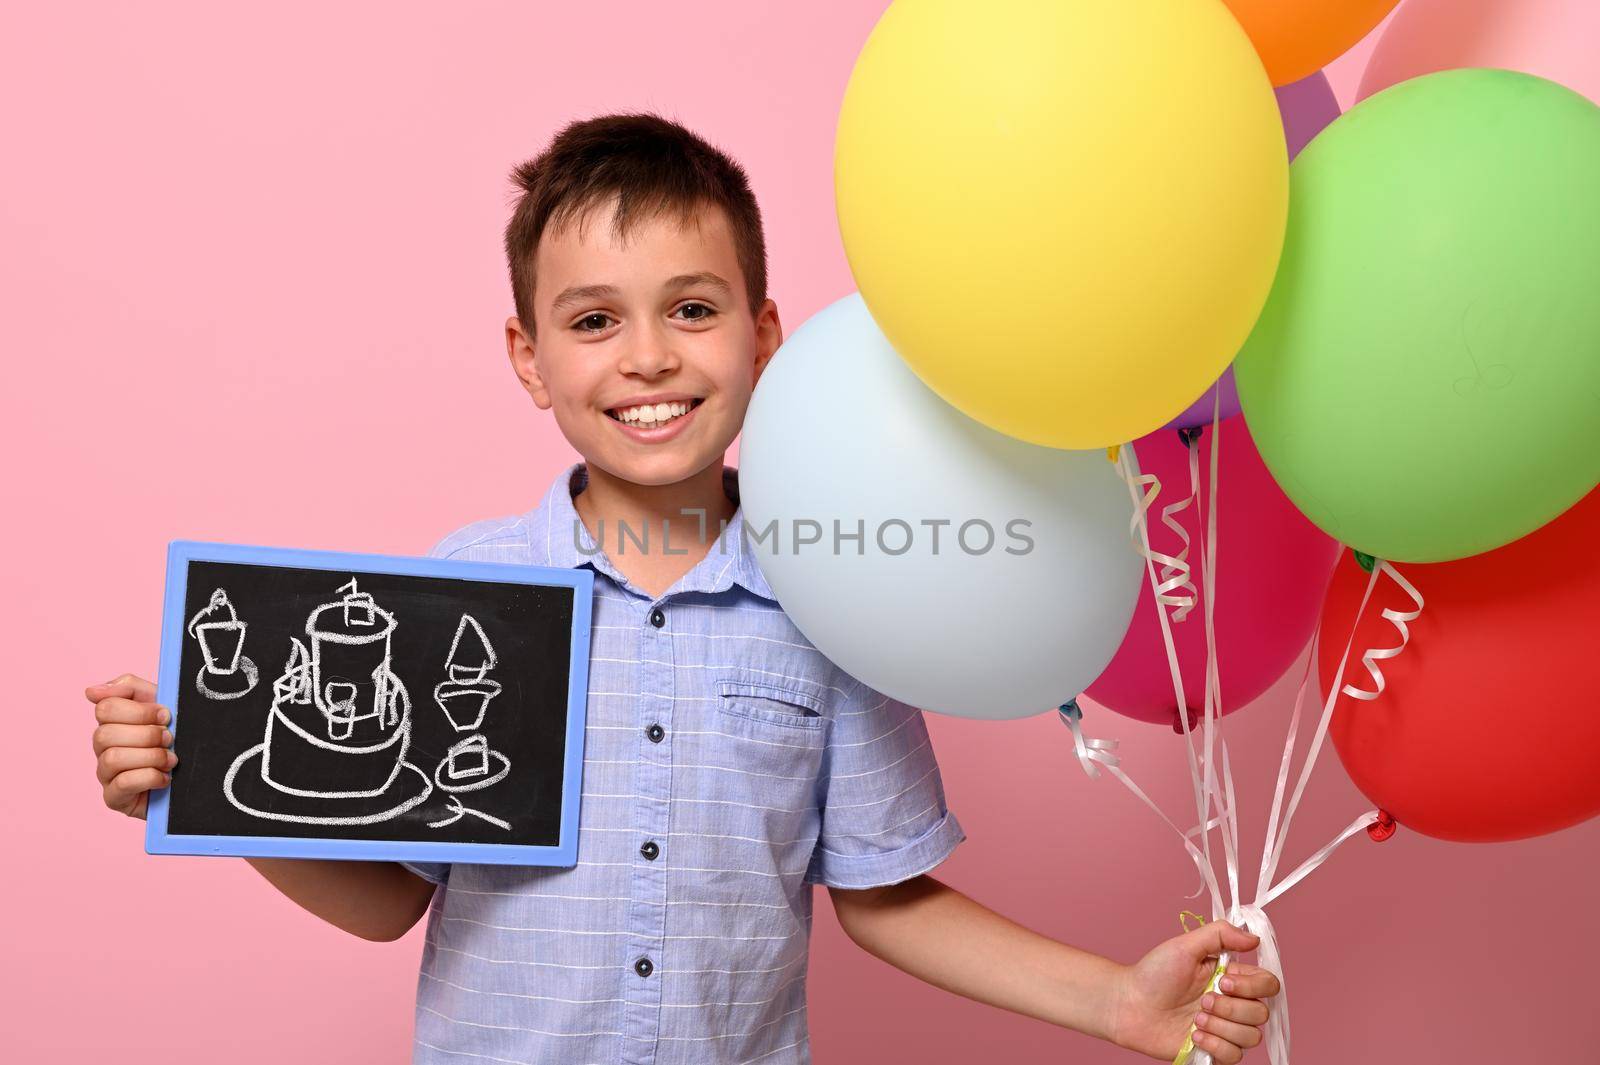 Cute boy holds multicolored colorful balloons in one hand and a chalkboard with drawn birthday cake in the other. Isolated over pink background with copy space by artgf